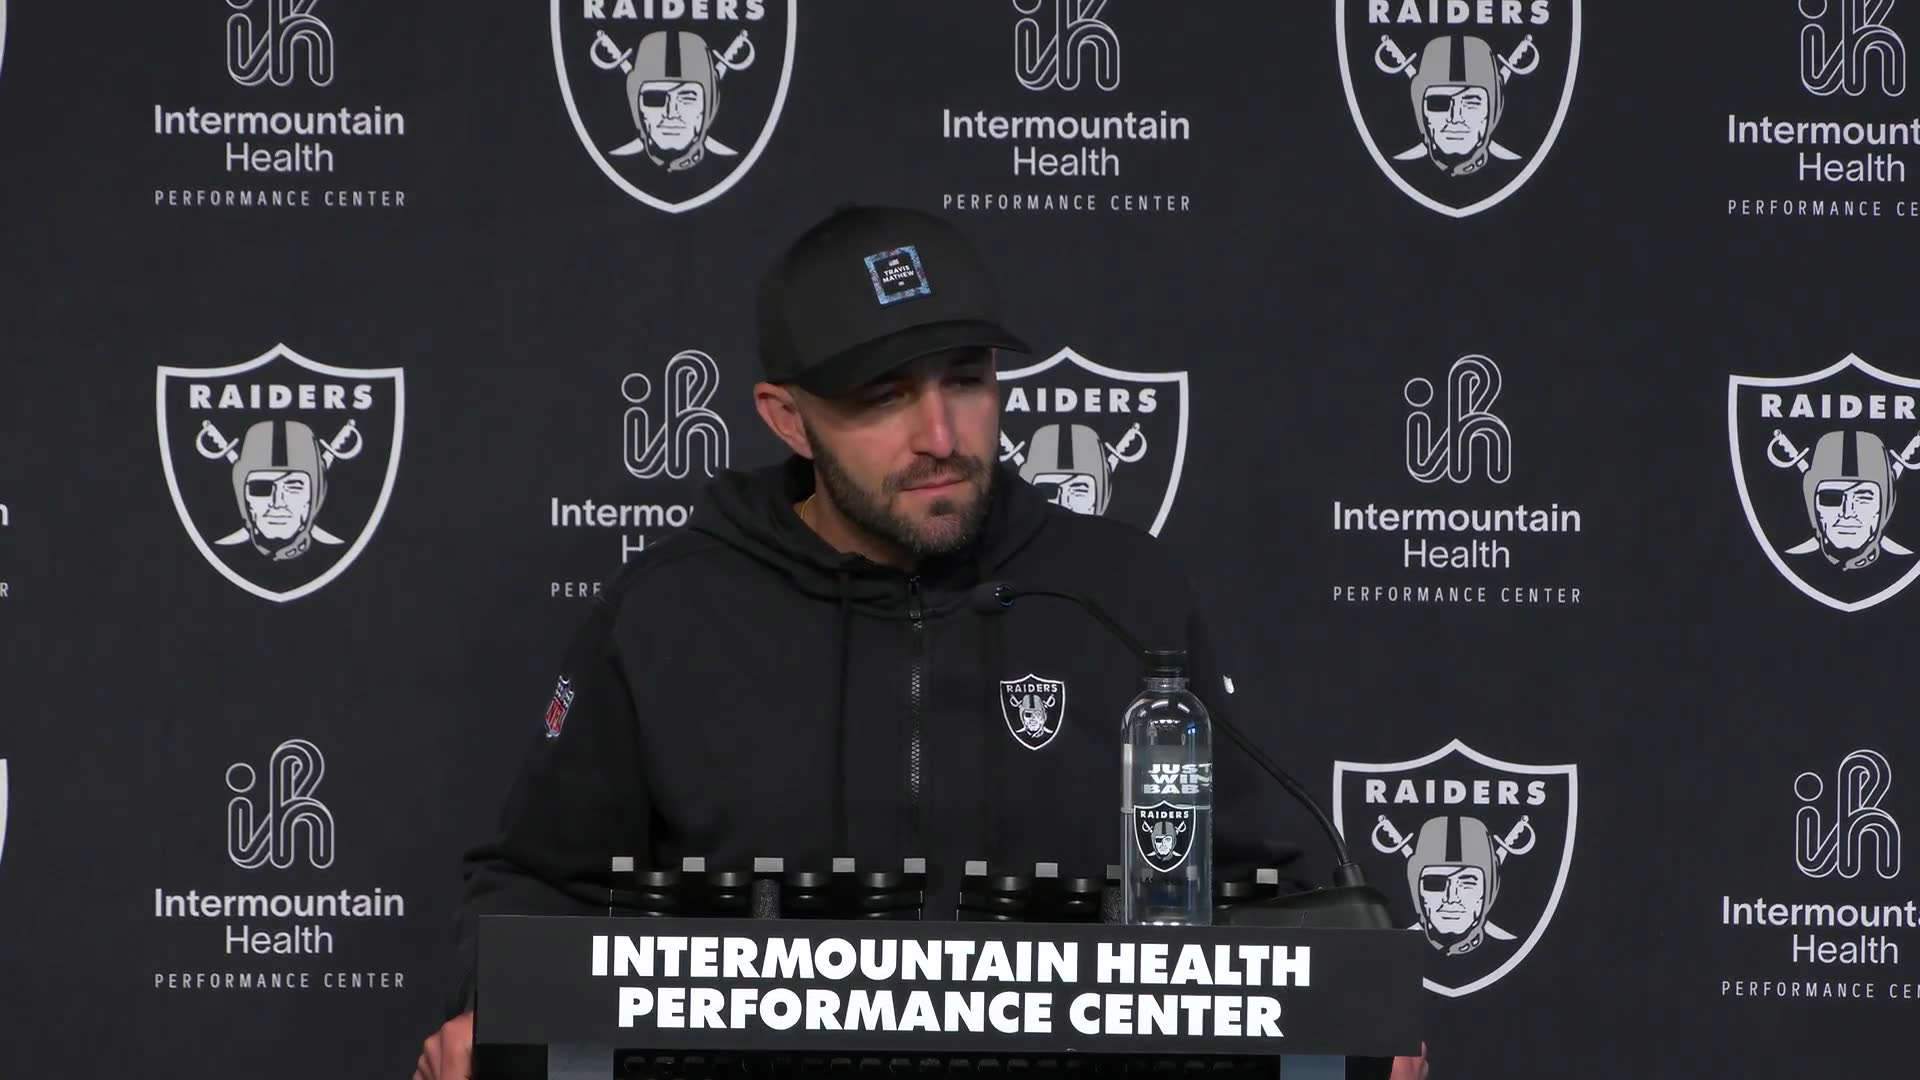 Raiders' OC Mick Lombardi on State of the Offense